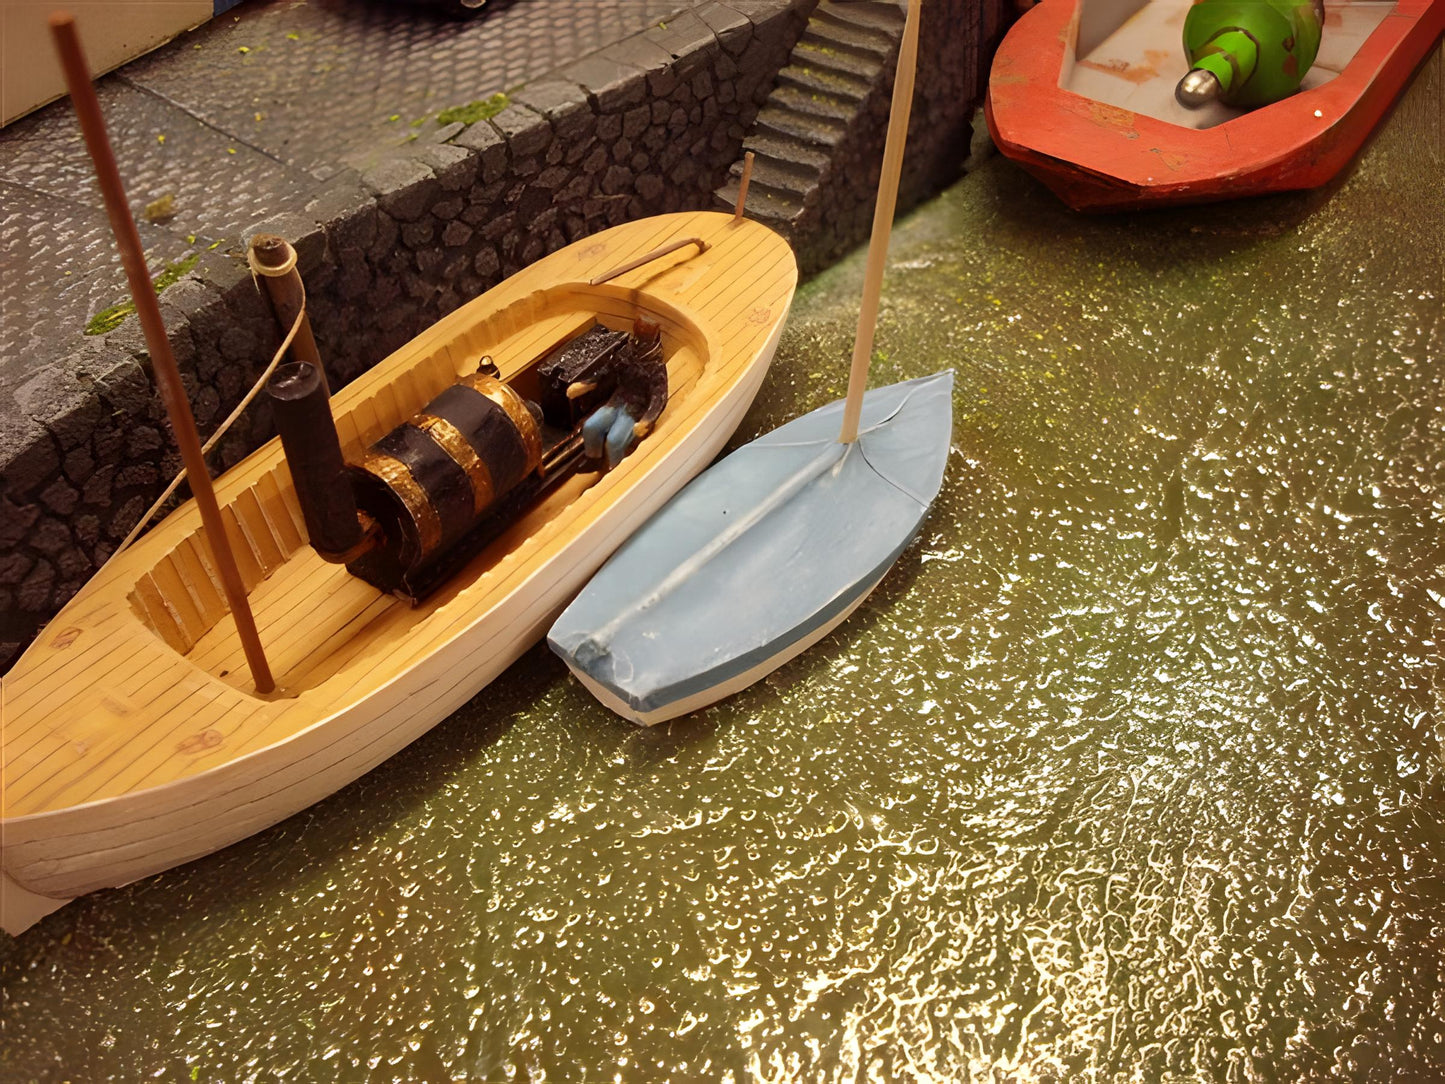 1:76  SMALL COVERED SAIL BOAT